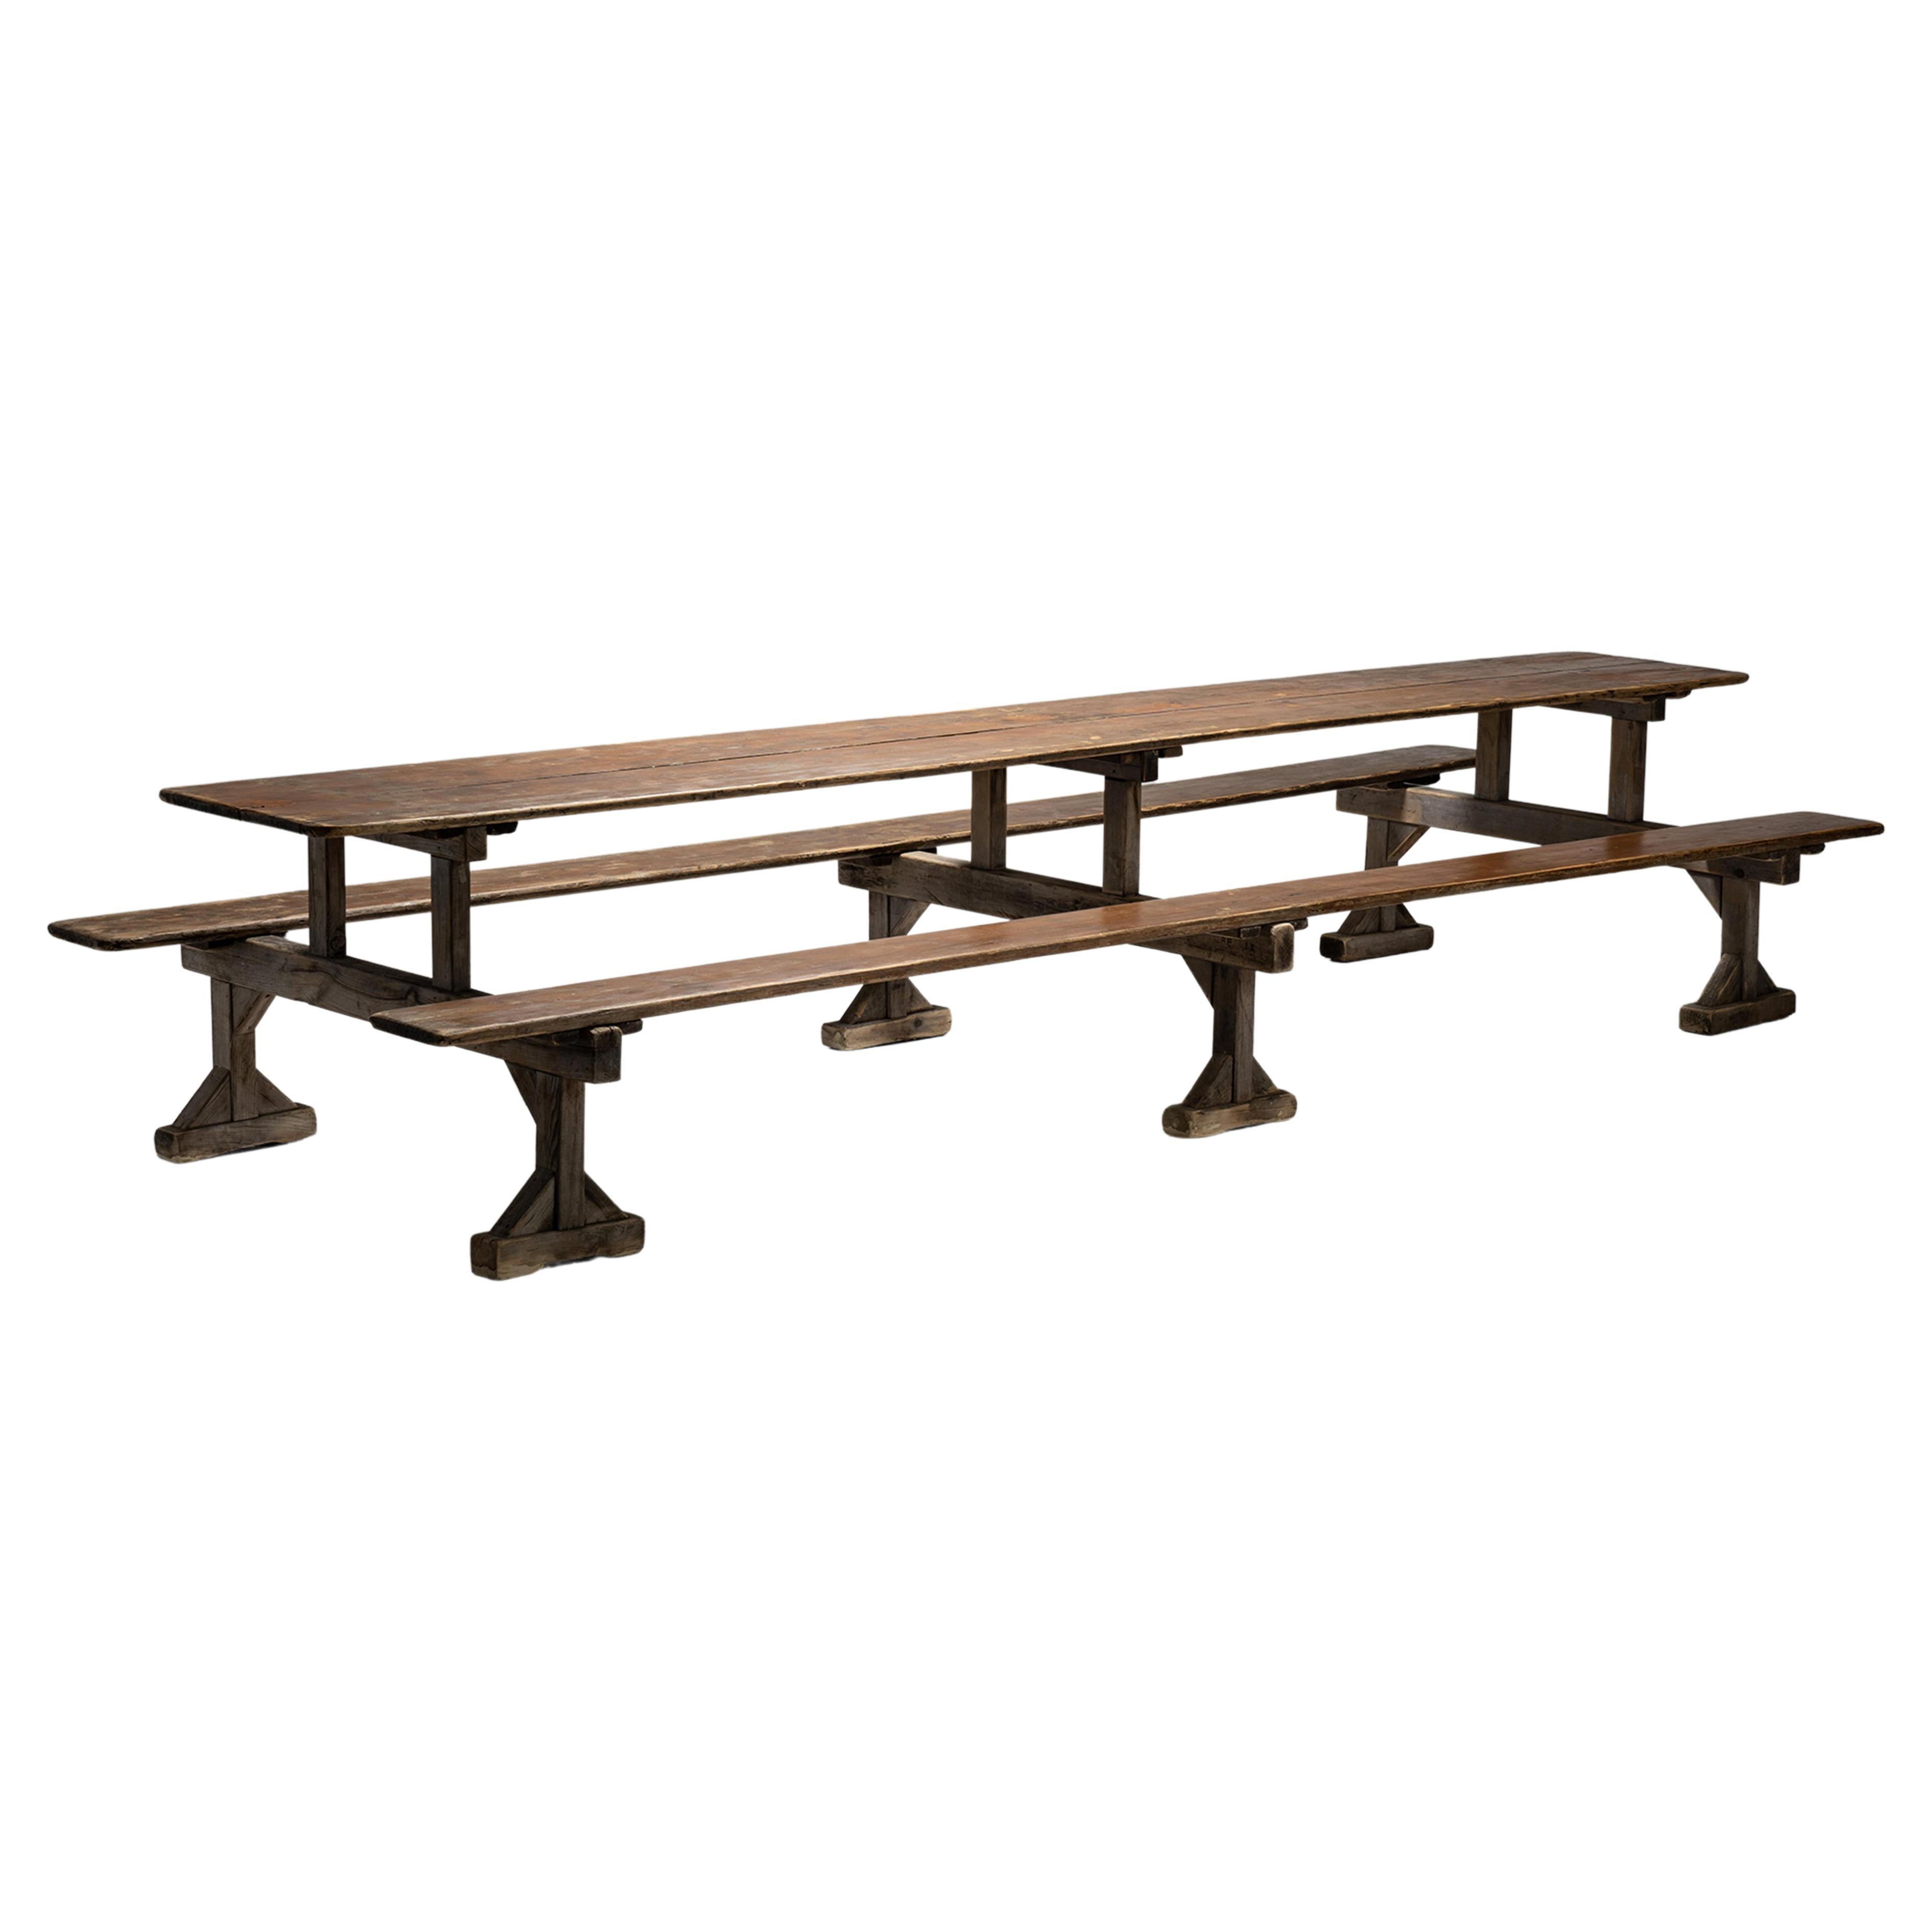 Huge Trestle Table with Benches, France, Circa 1900